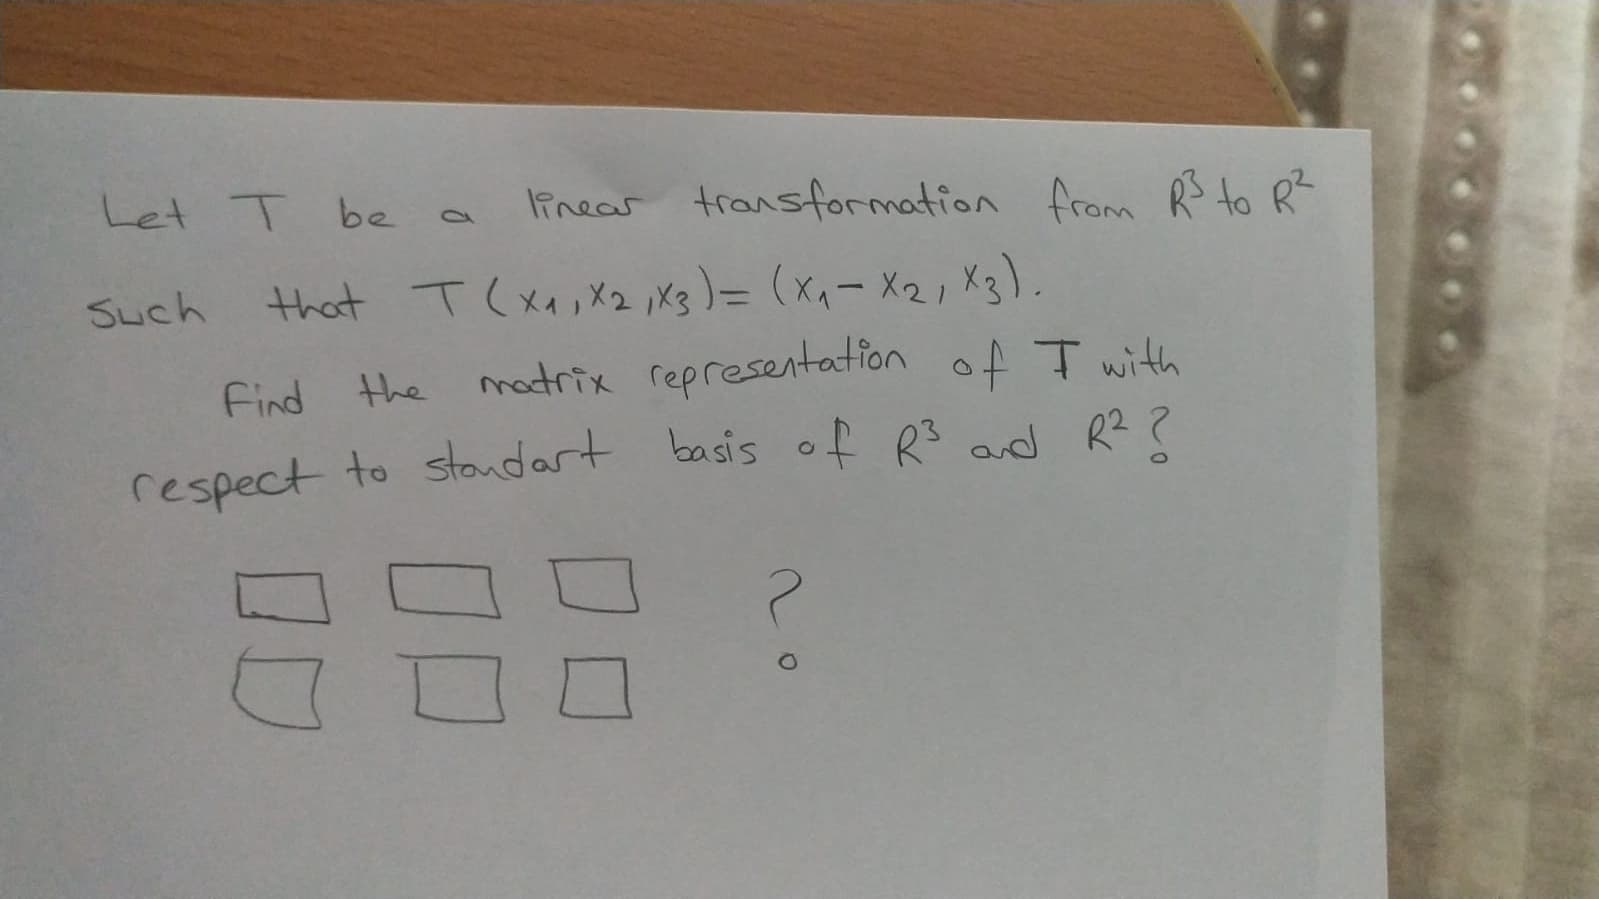 Let T be
linear transformation from R to R
Such
that T (xx, X2 ,X3)= (x,-X2, X3).
Find the motrix representatfon of T with
respect to stoaudart basis of R3 ad R2?
